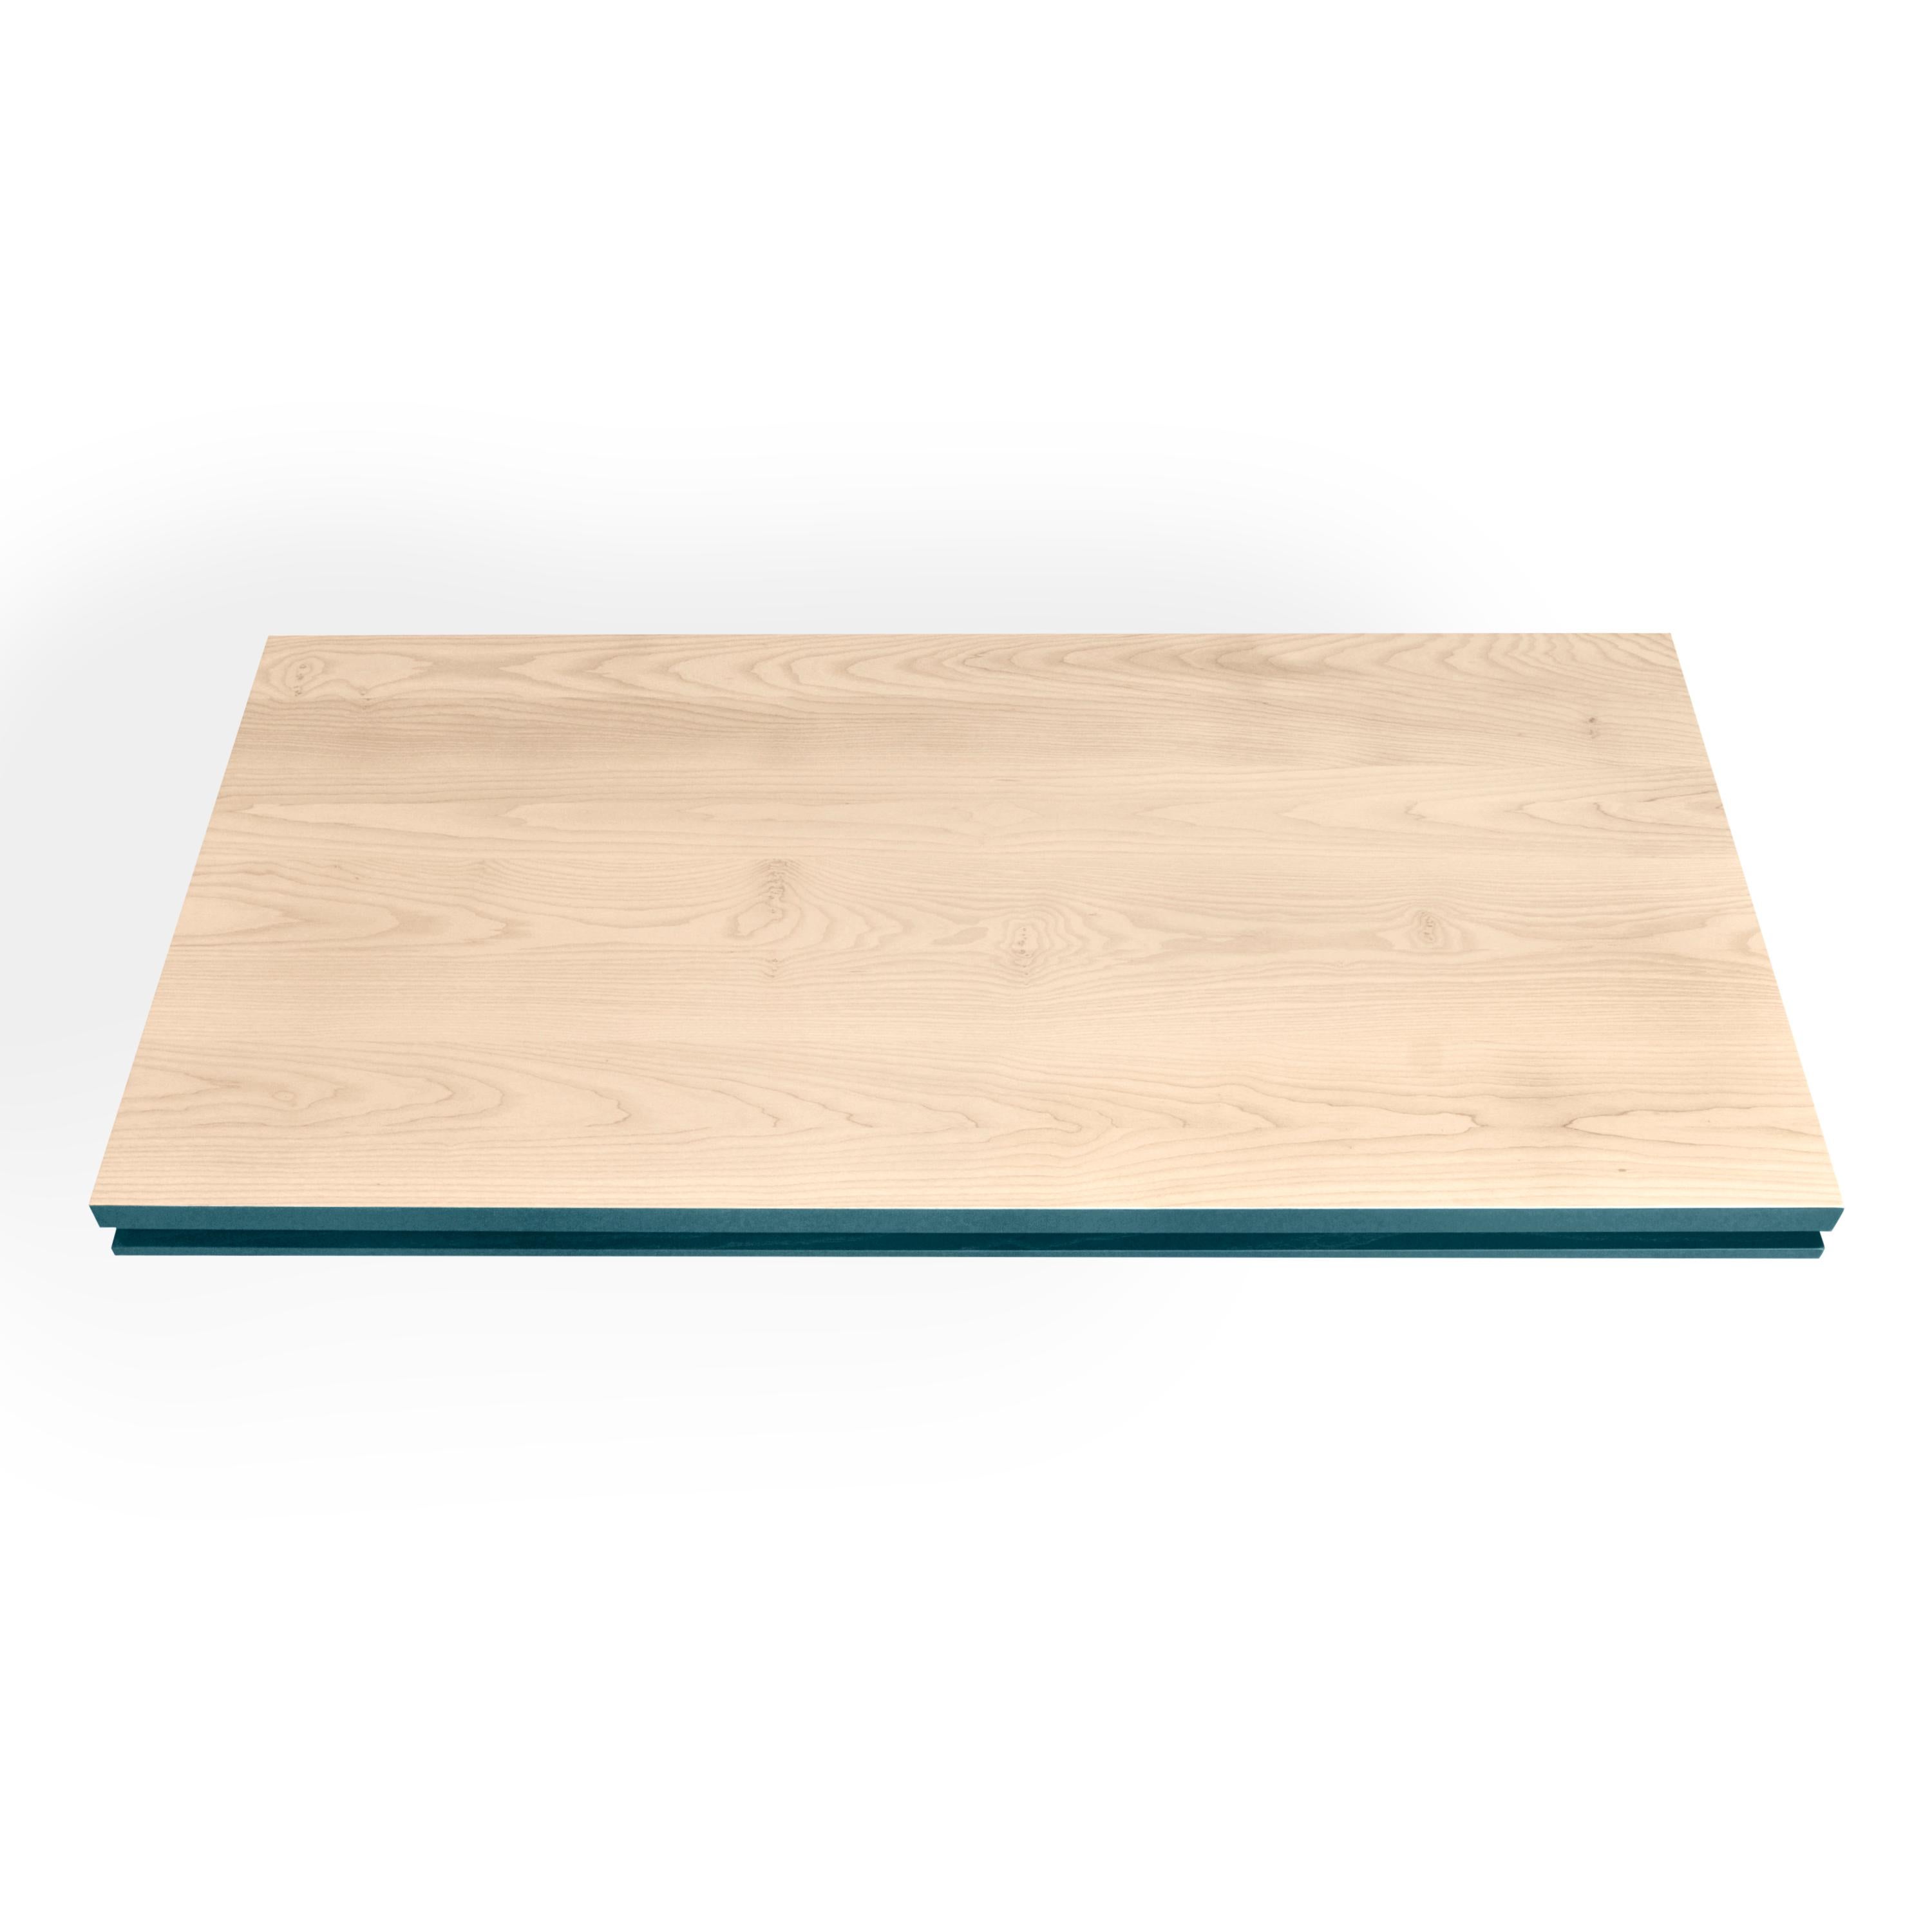 Light Blue Extensible Table in Solid Ash Wood, Designed by Eric Gizard, Paris For Sale 1